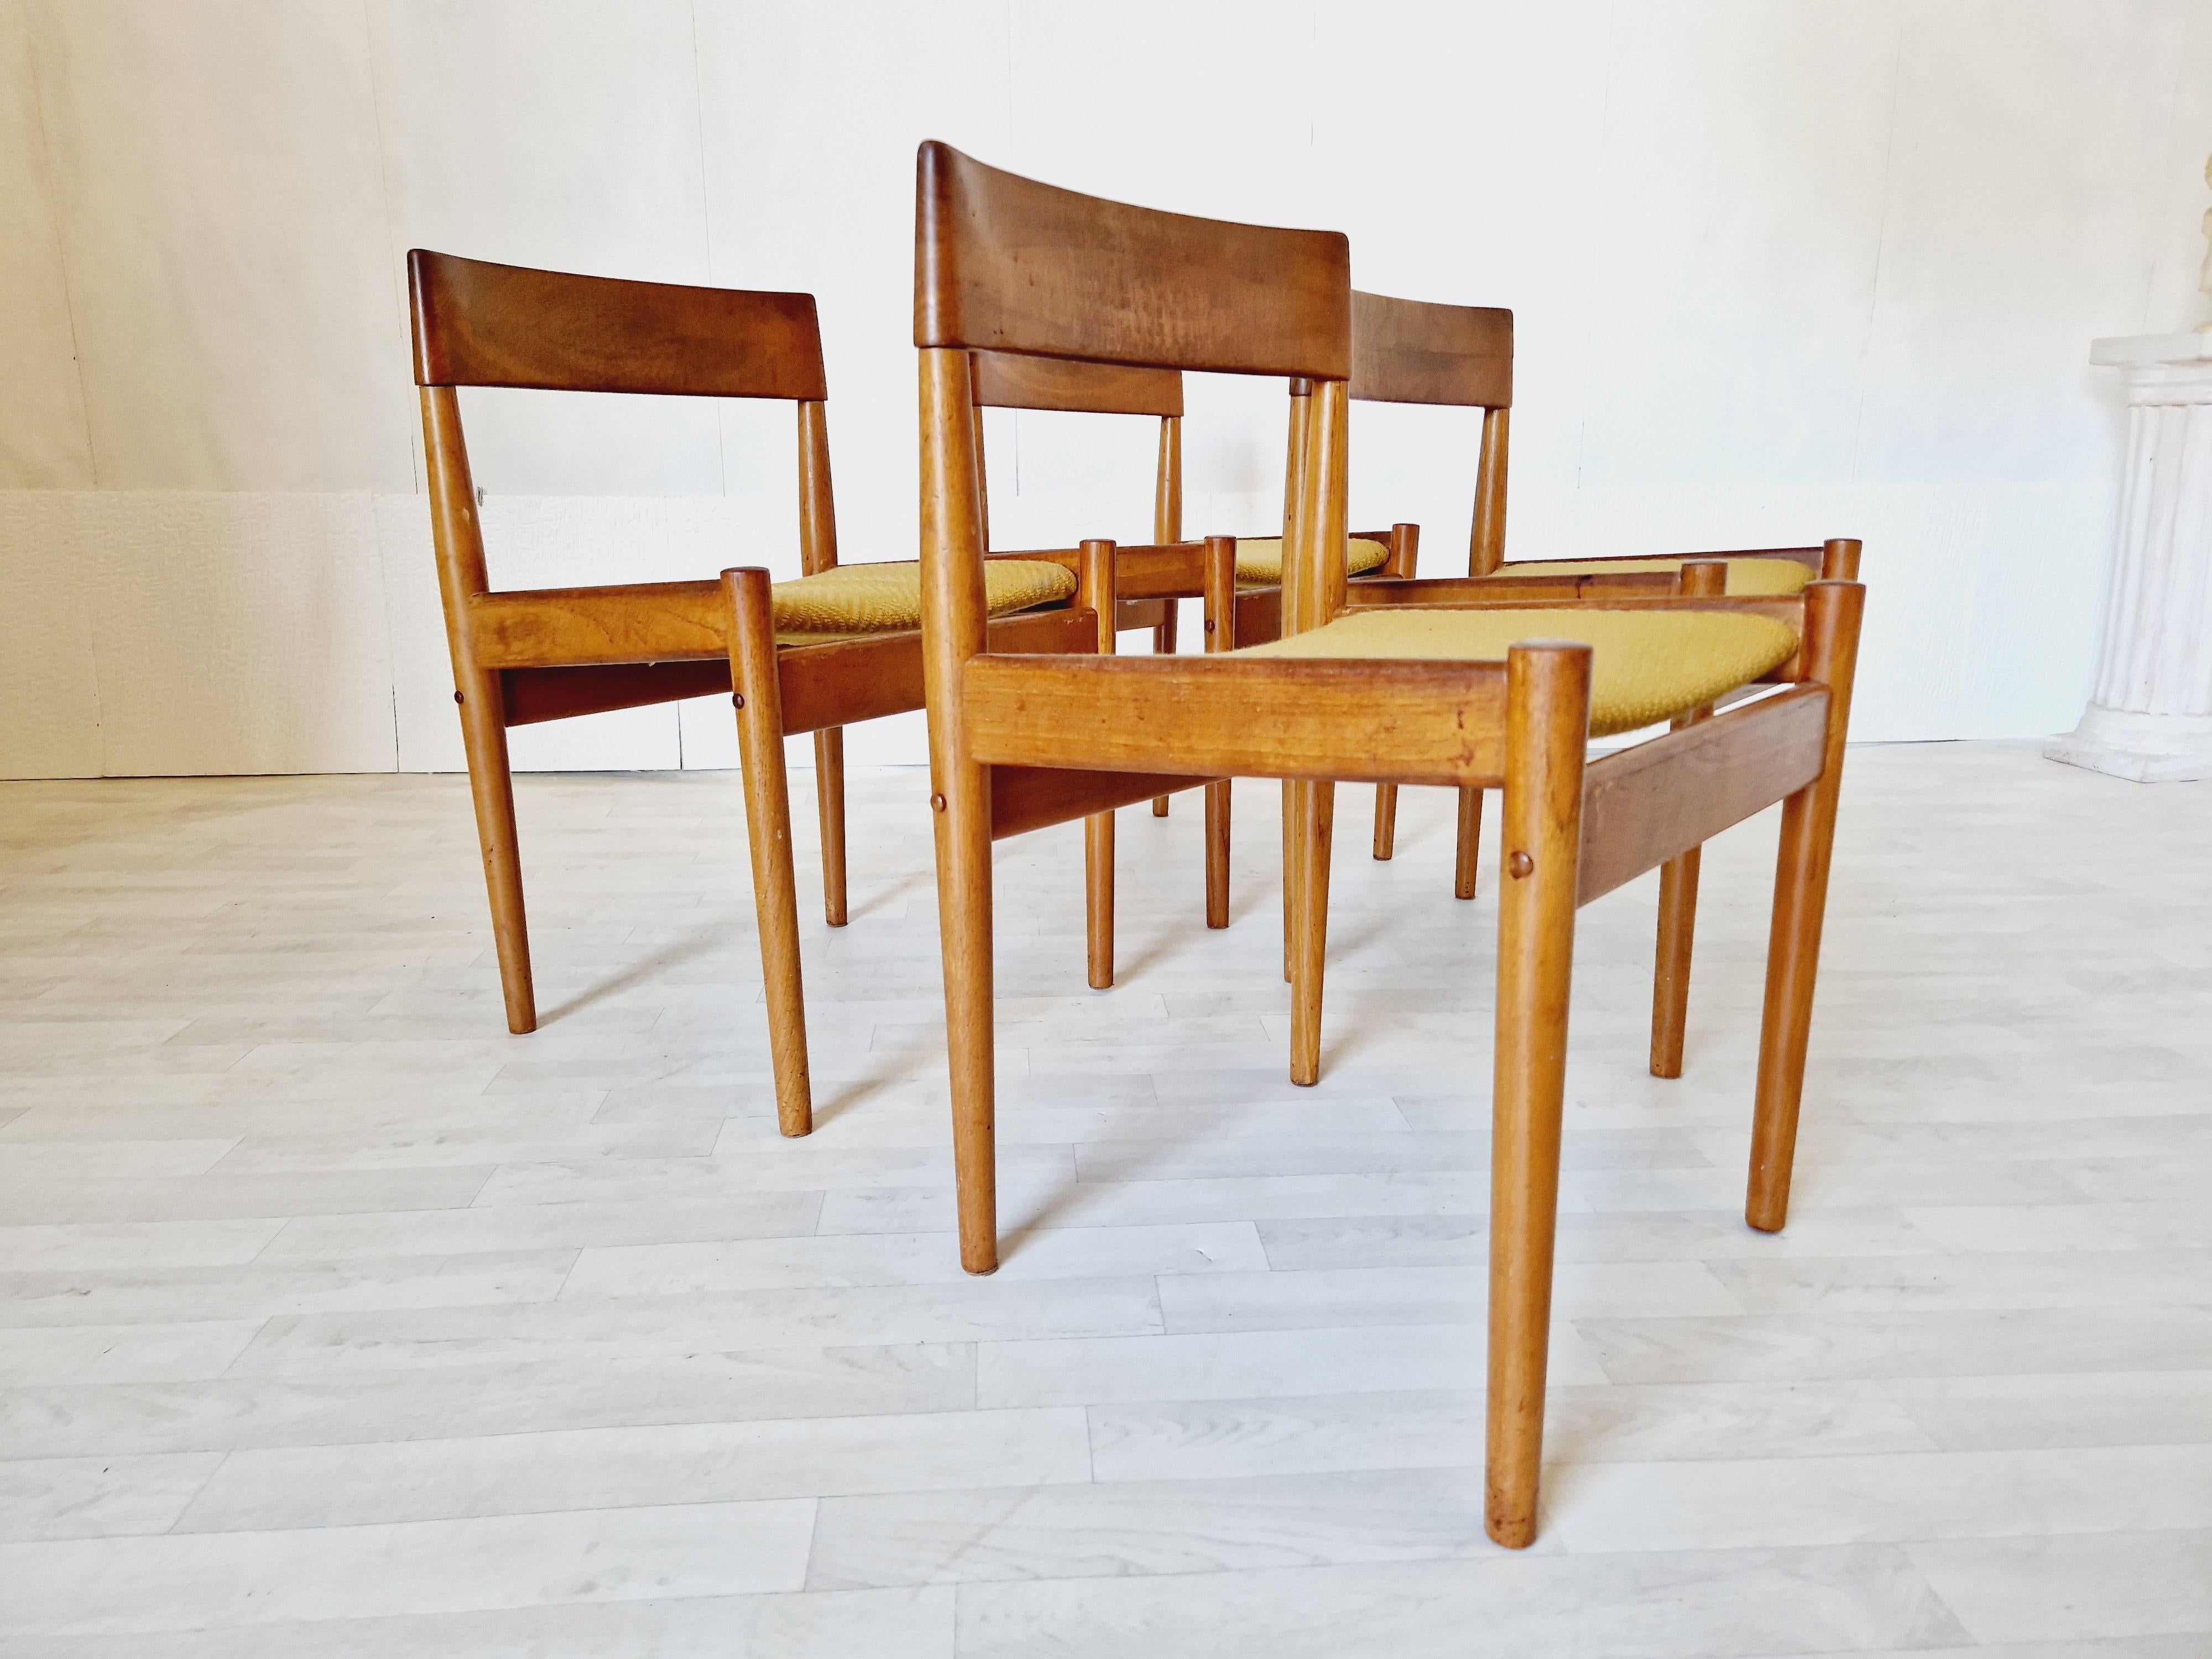 ROCAILLE ANTIQUES

Add charm and elegance to your dining room with this set of six mid-century dining chairs, four are from Grete Jalk for Poul Jeppesen model PJ3-2. The chairs come in a beautiful tan hue with a smooth finish and yellow herringbone